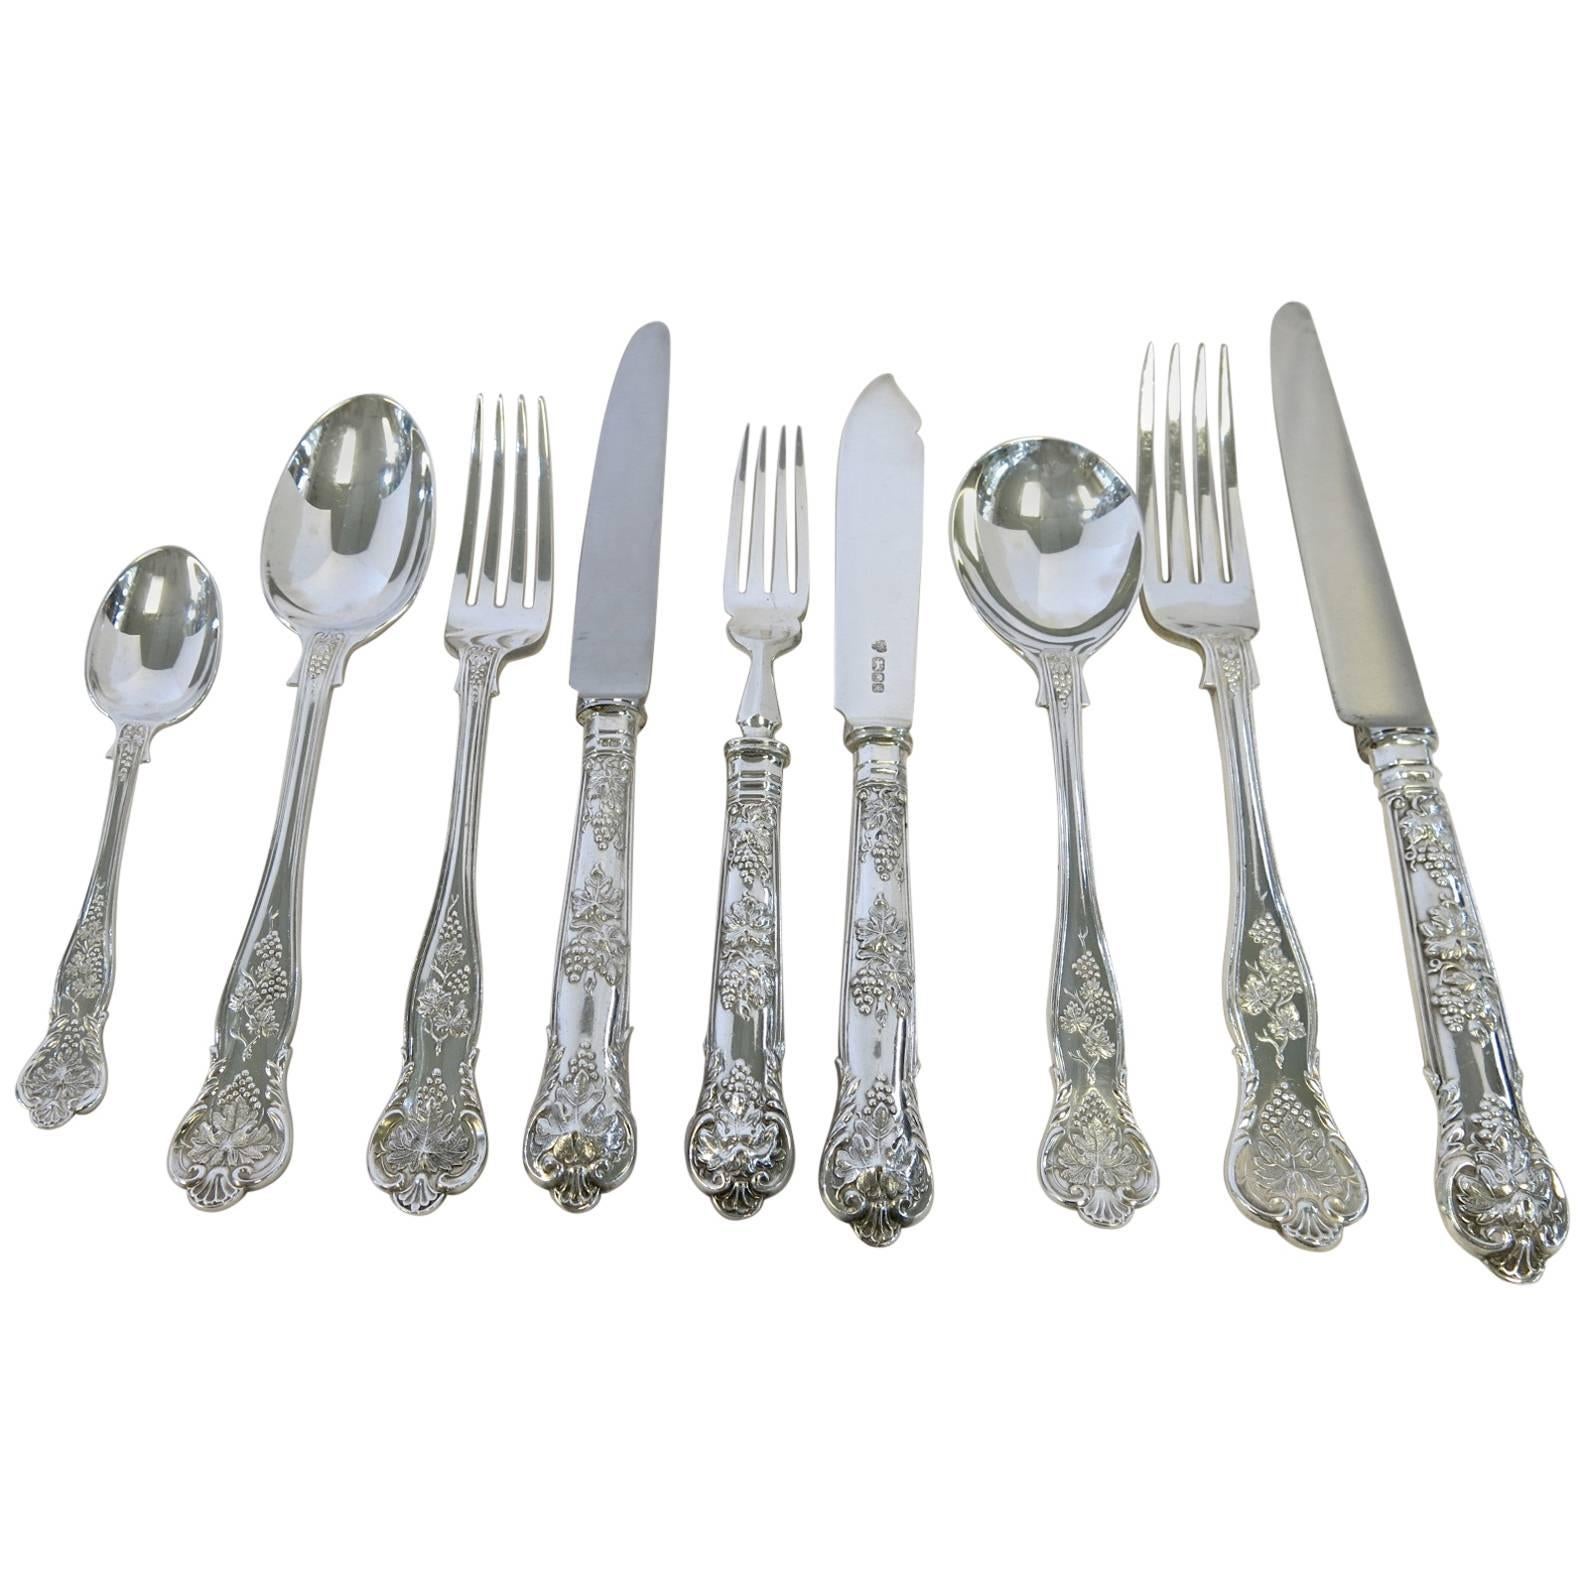 Bright Vine Pattern, English, Sterling Silver Flatware Set Fitted in Box